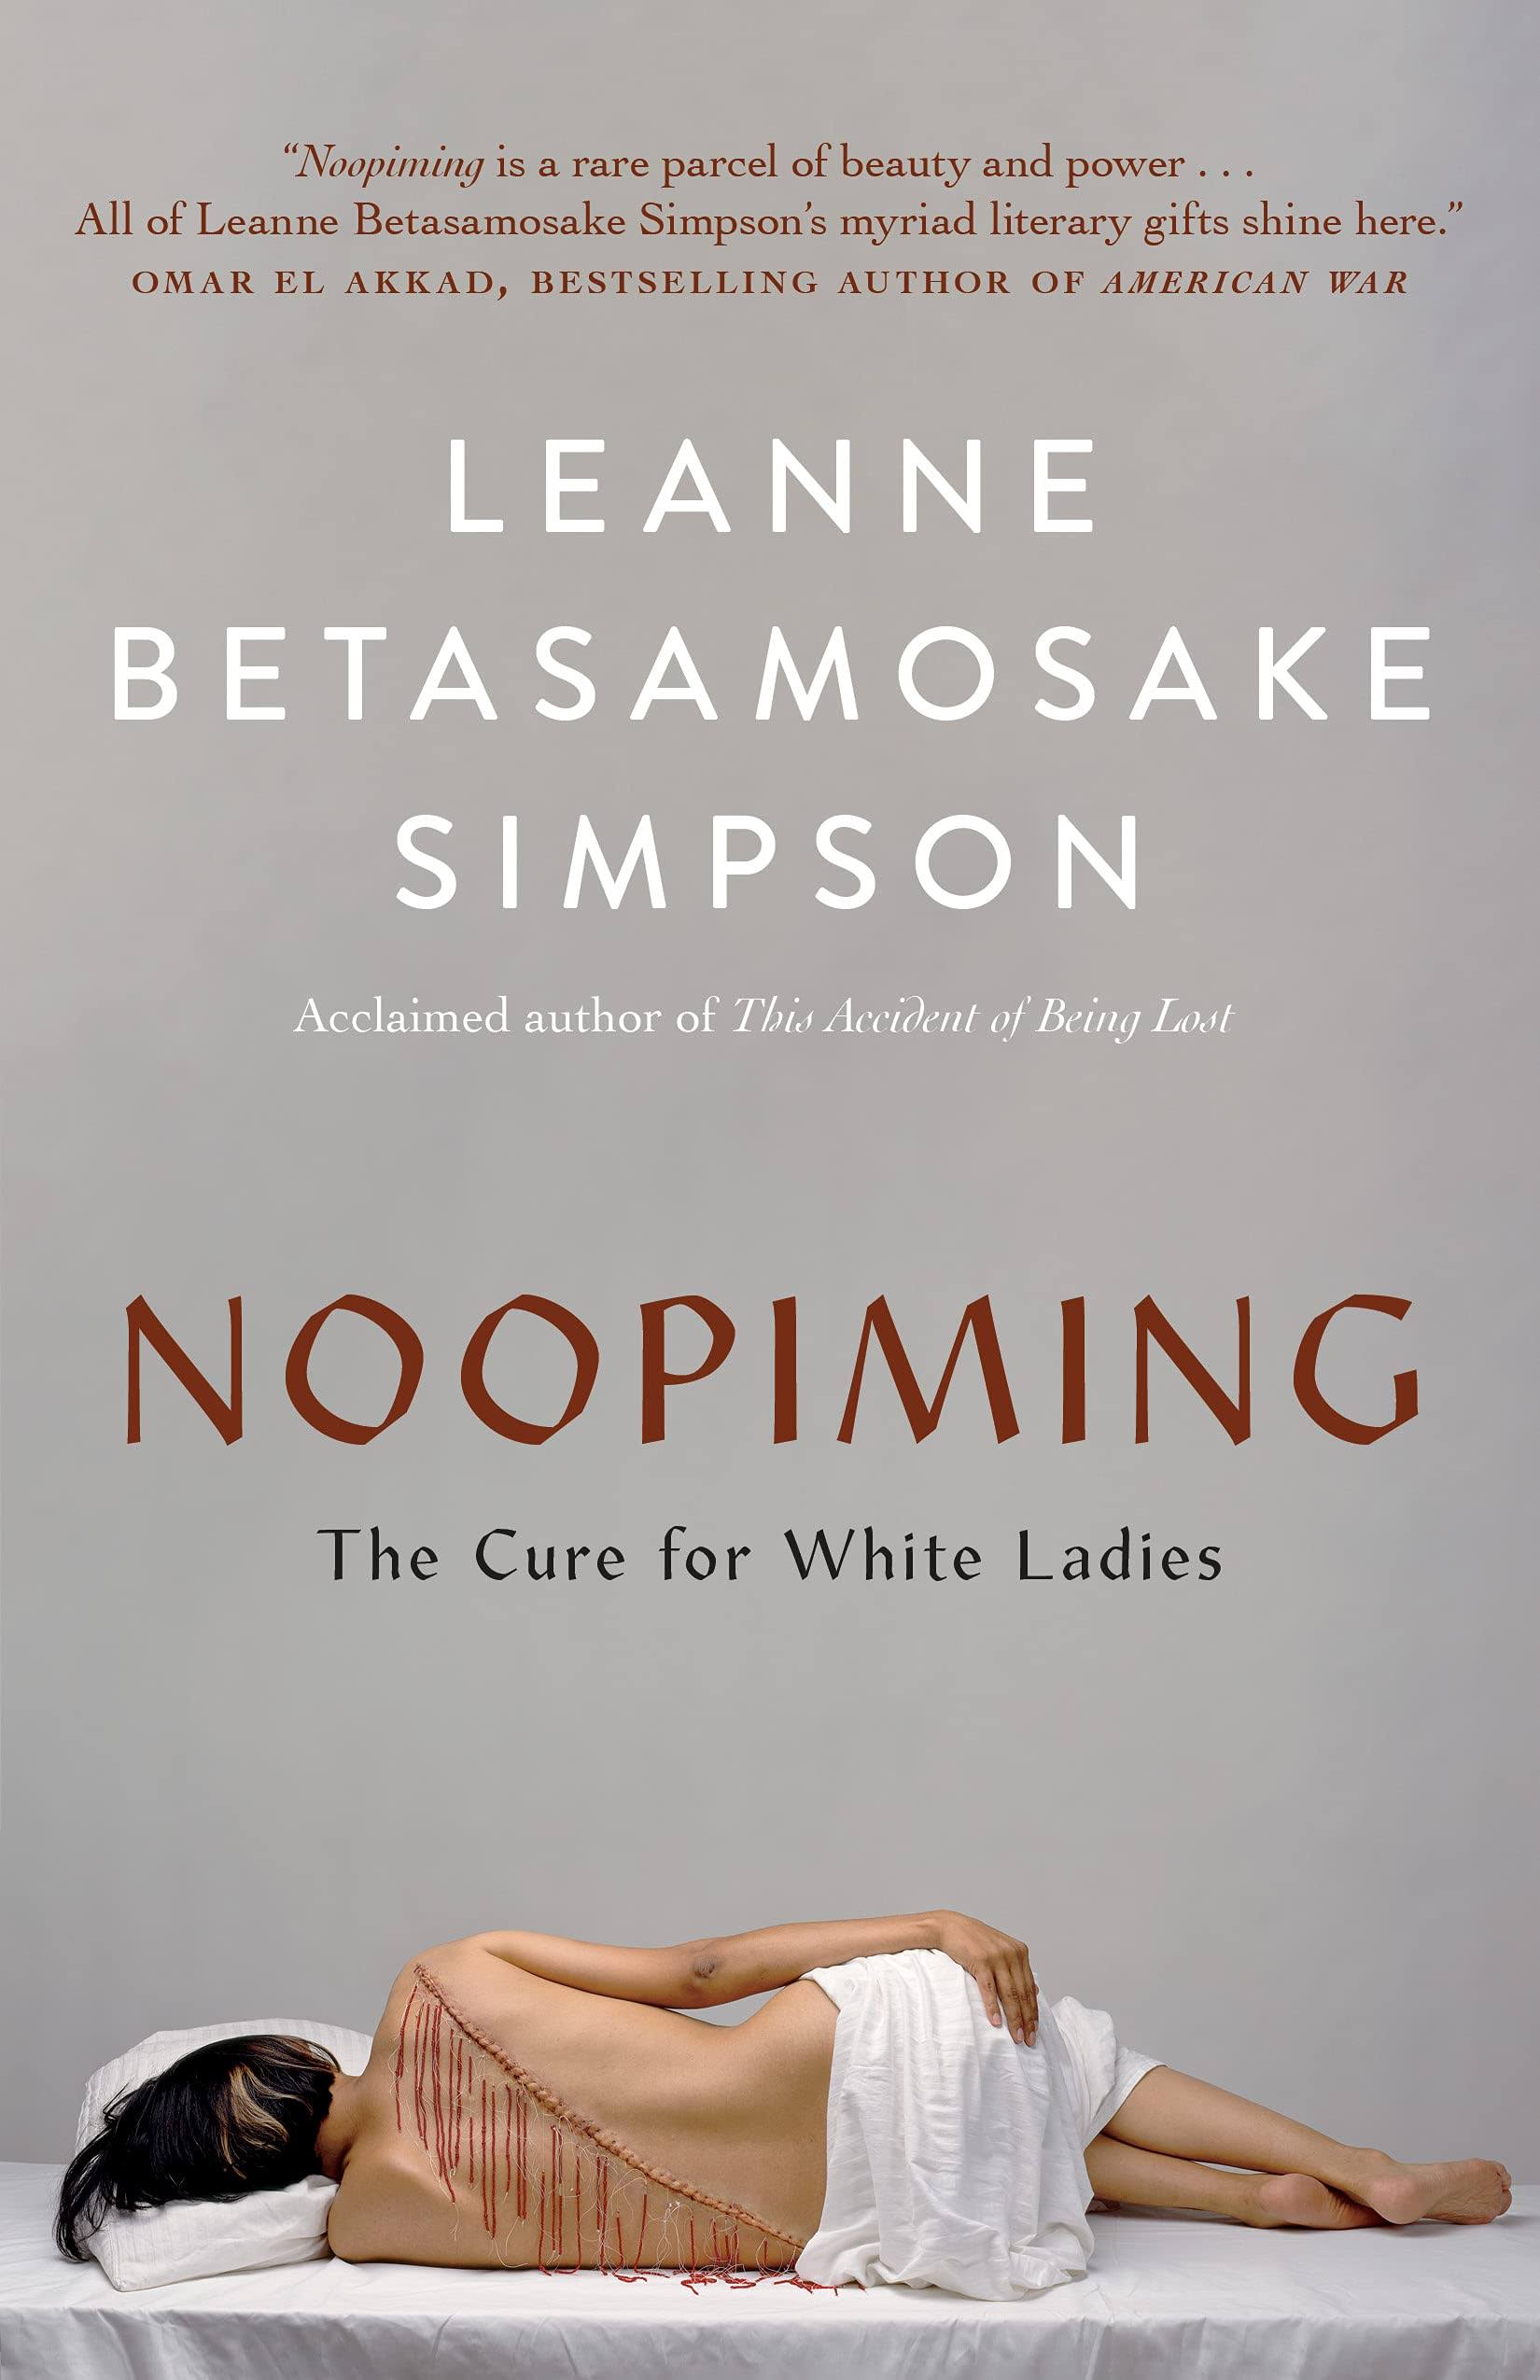 Noopiming: The Cure for White Ladies [Book]